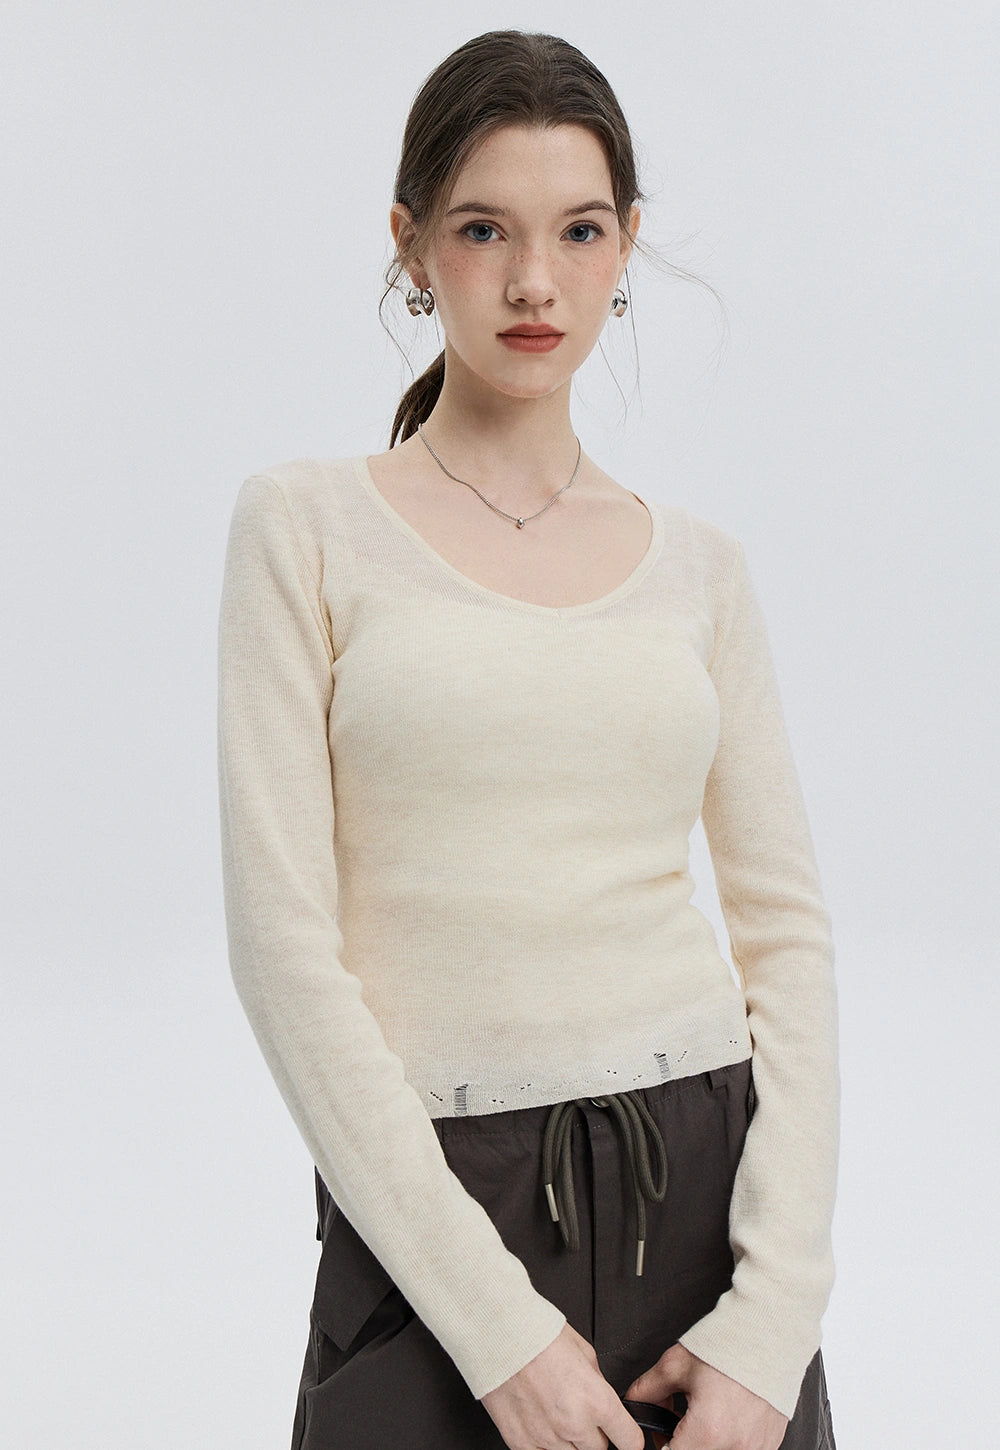 Classic Long Sleeve Knit Top with V-Neck Design